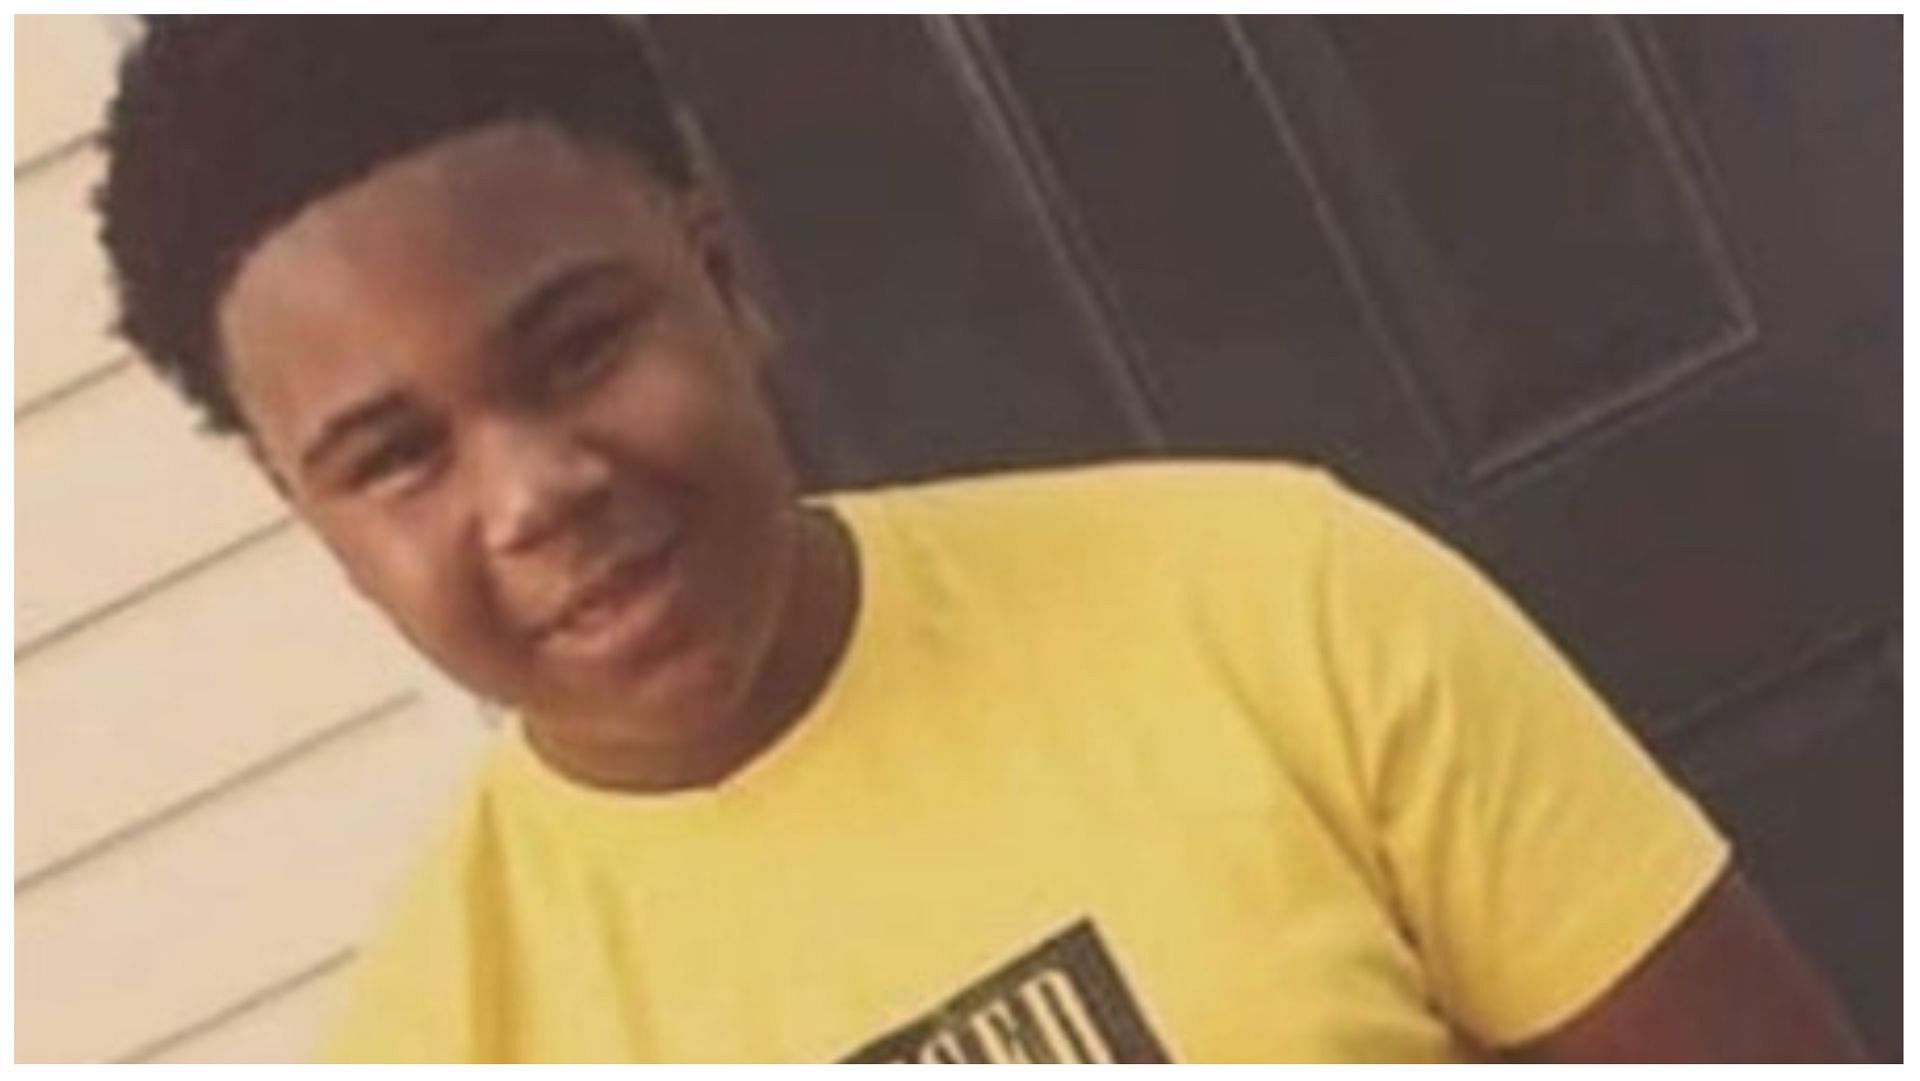 17-year-old Cion Carroll was found dead in a shallow grave in November, (Image via Jadesola/Twitter)